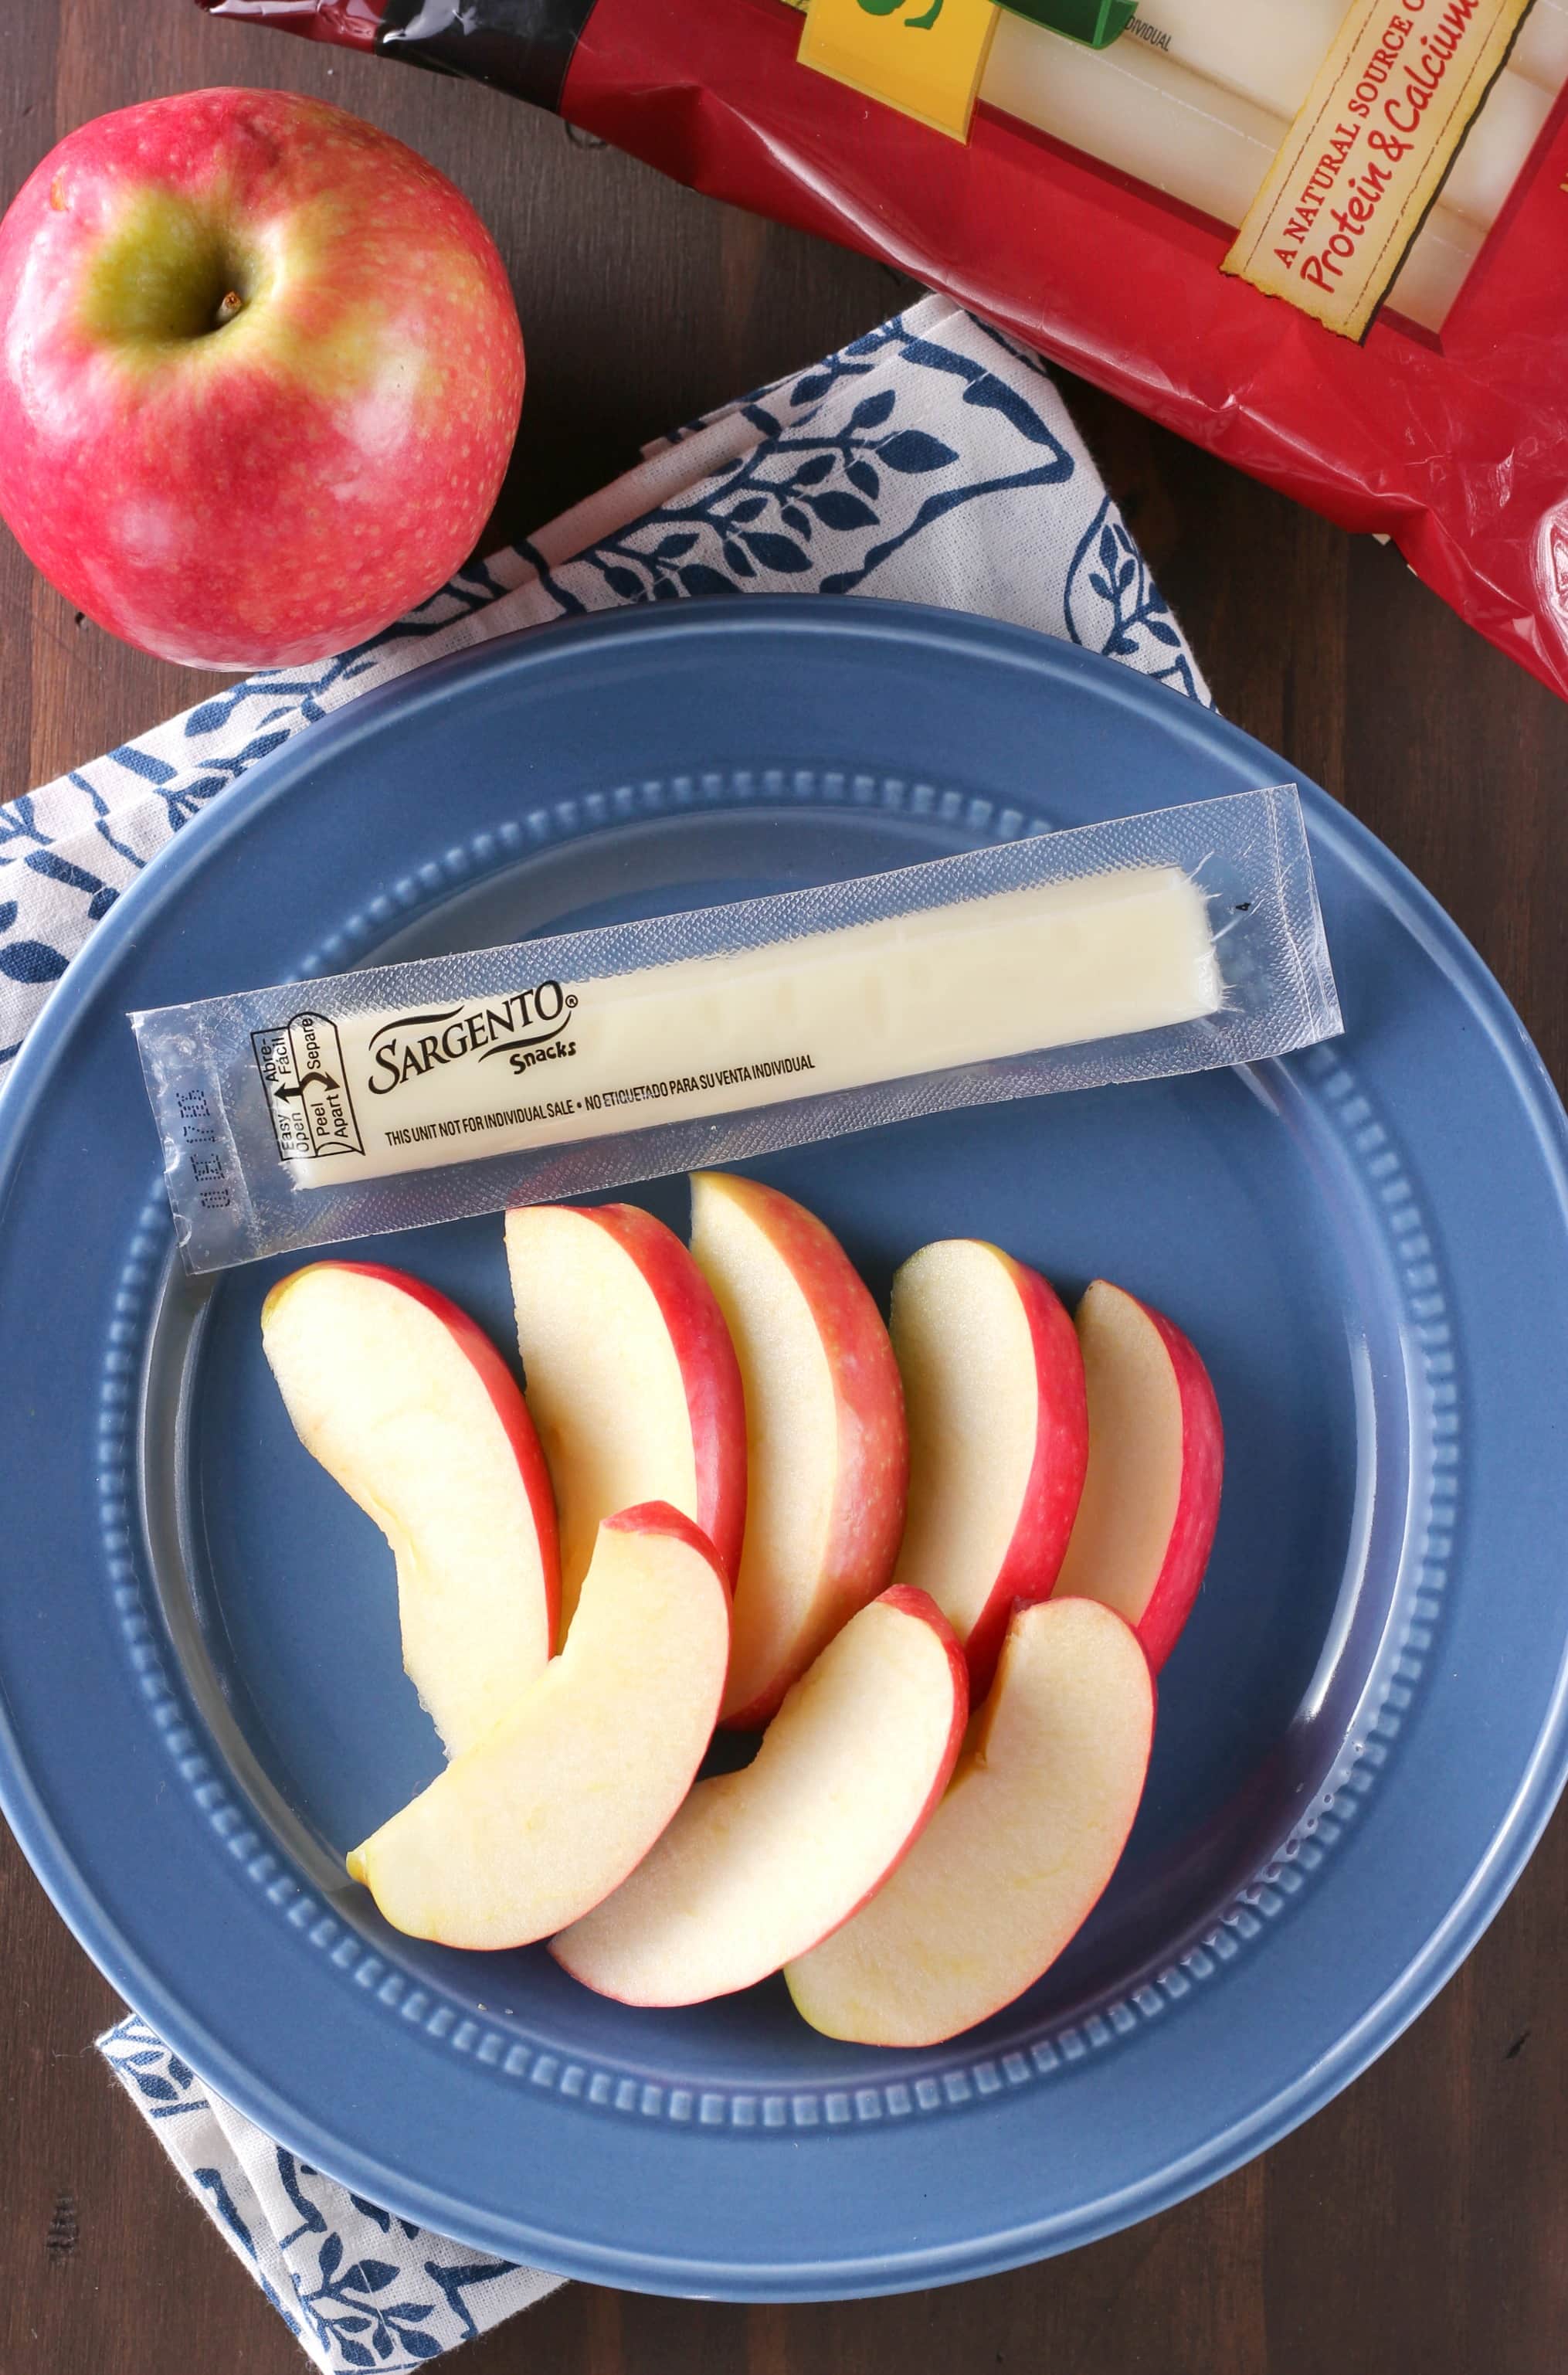 Sargento Cheese Stick with Apple Slices